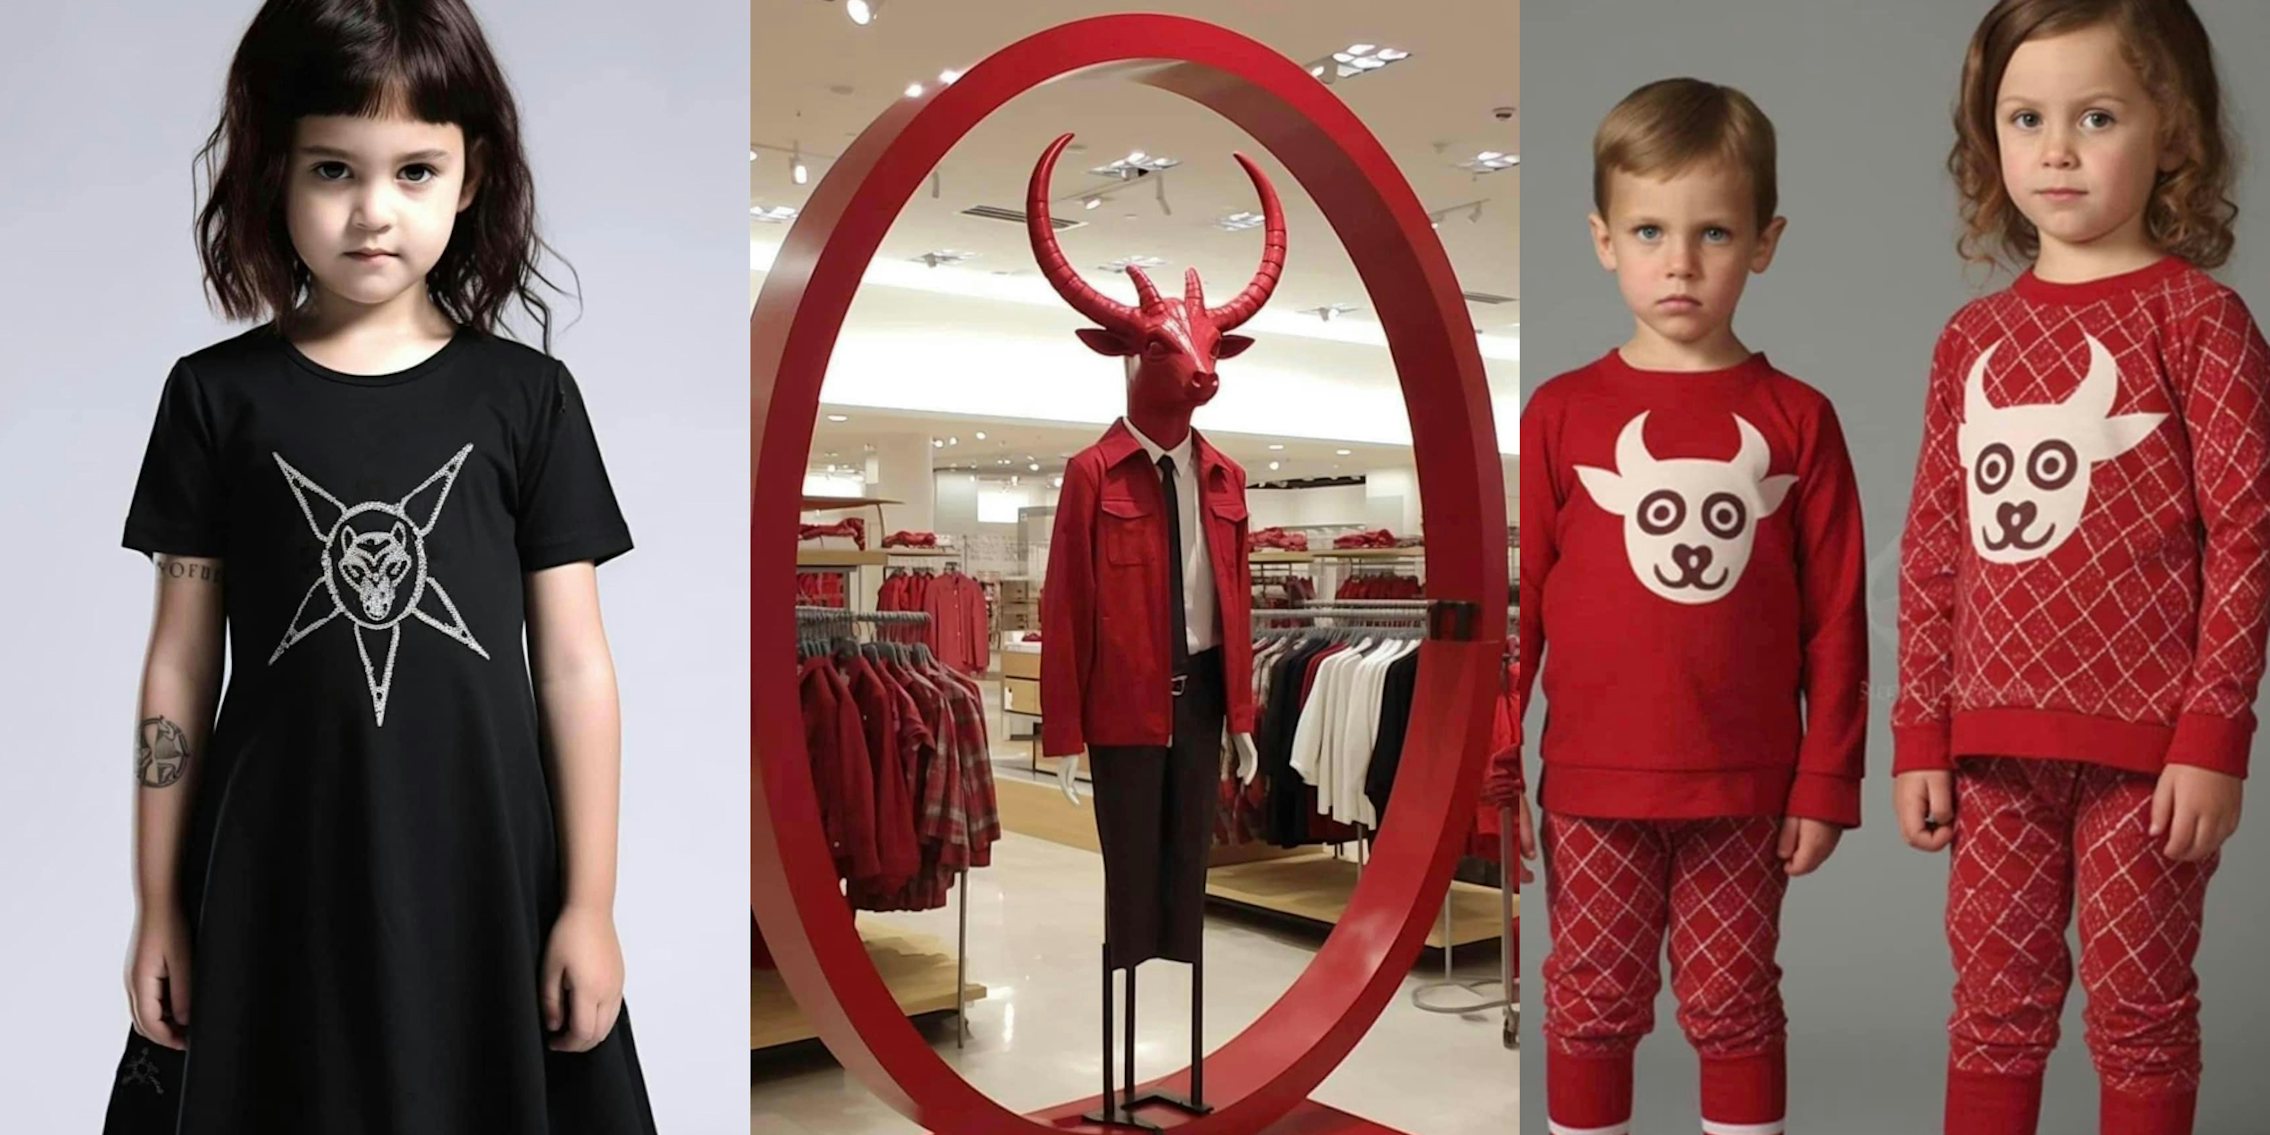 AI generated image of child in satanic dress in front of grey background (l) AI generated image of Target Baphomet display (c) AI generated image of children in satanic pj's in front of grey background (r)